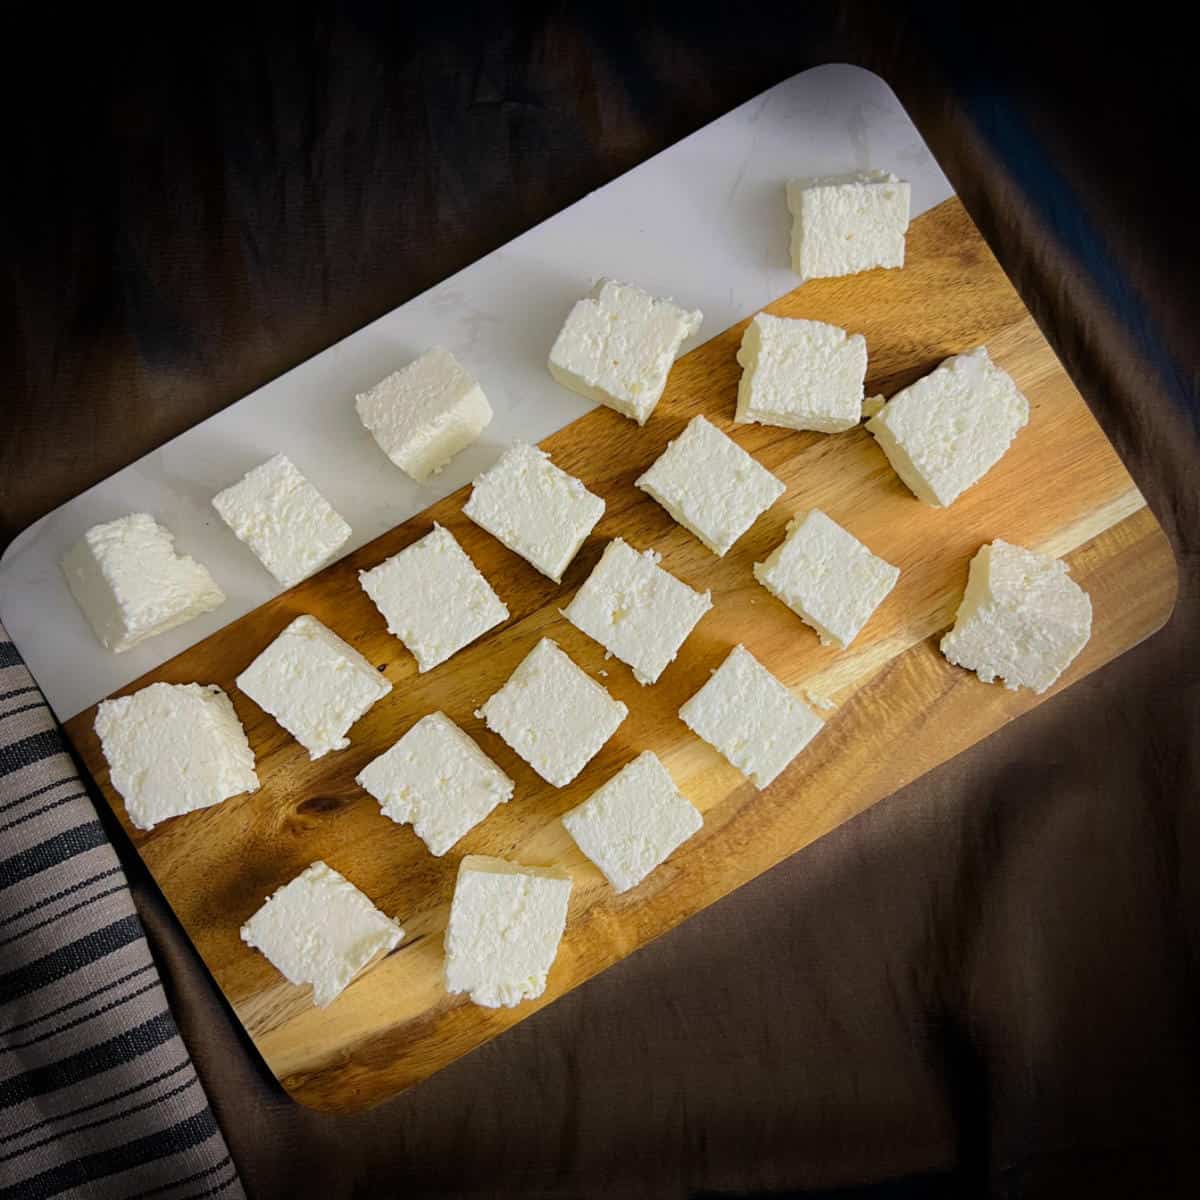 Paneer cubes placed on a wooden board.